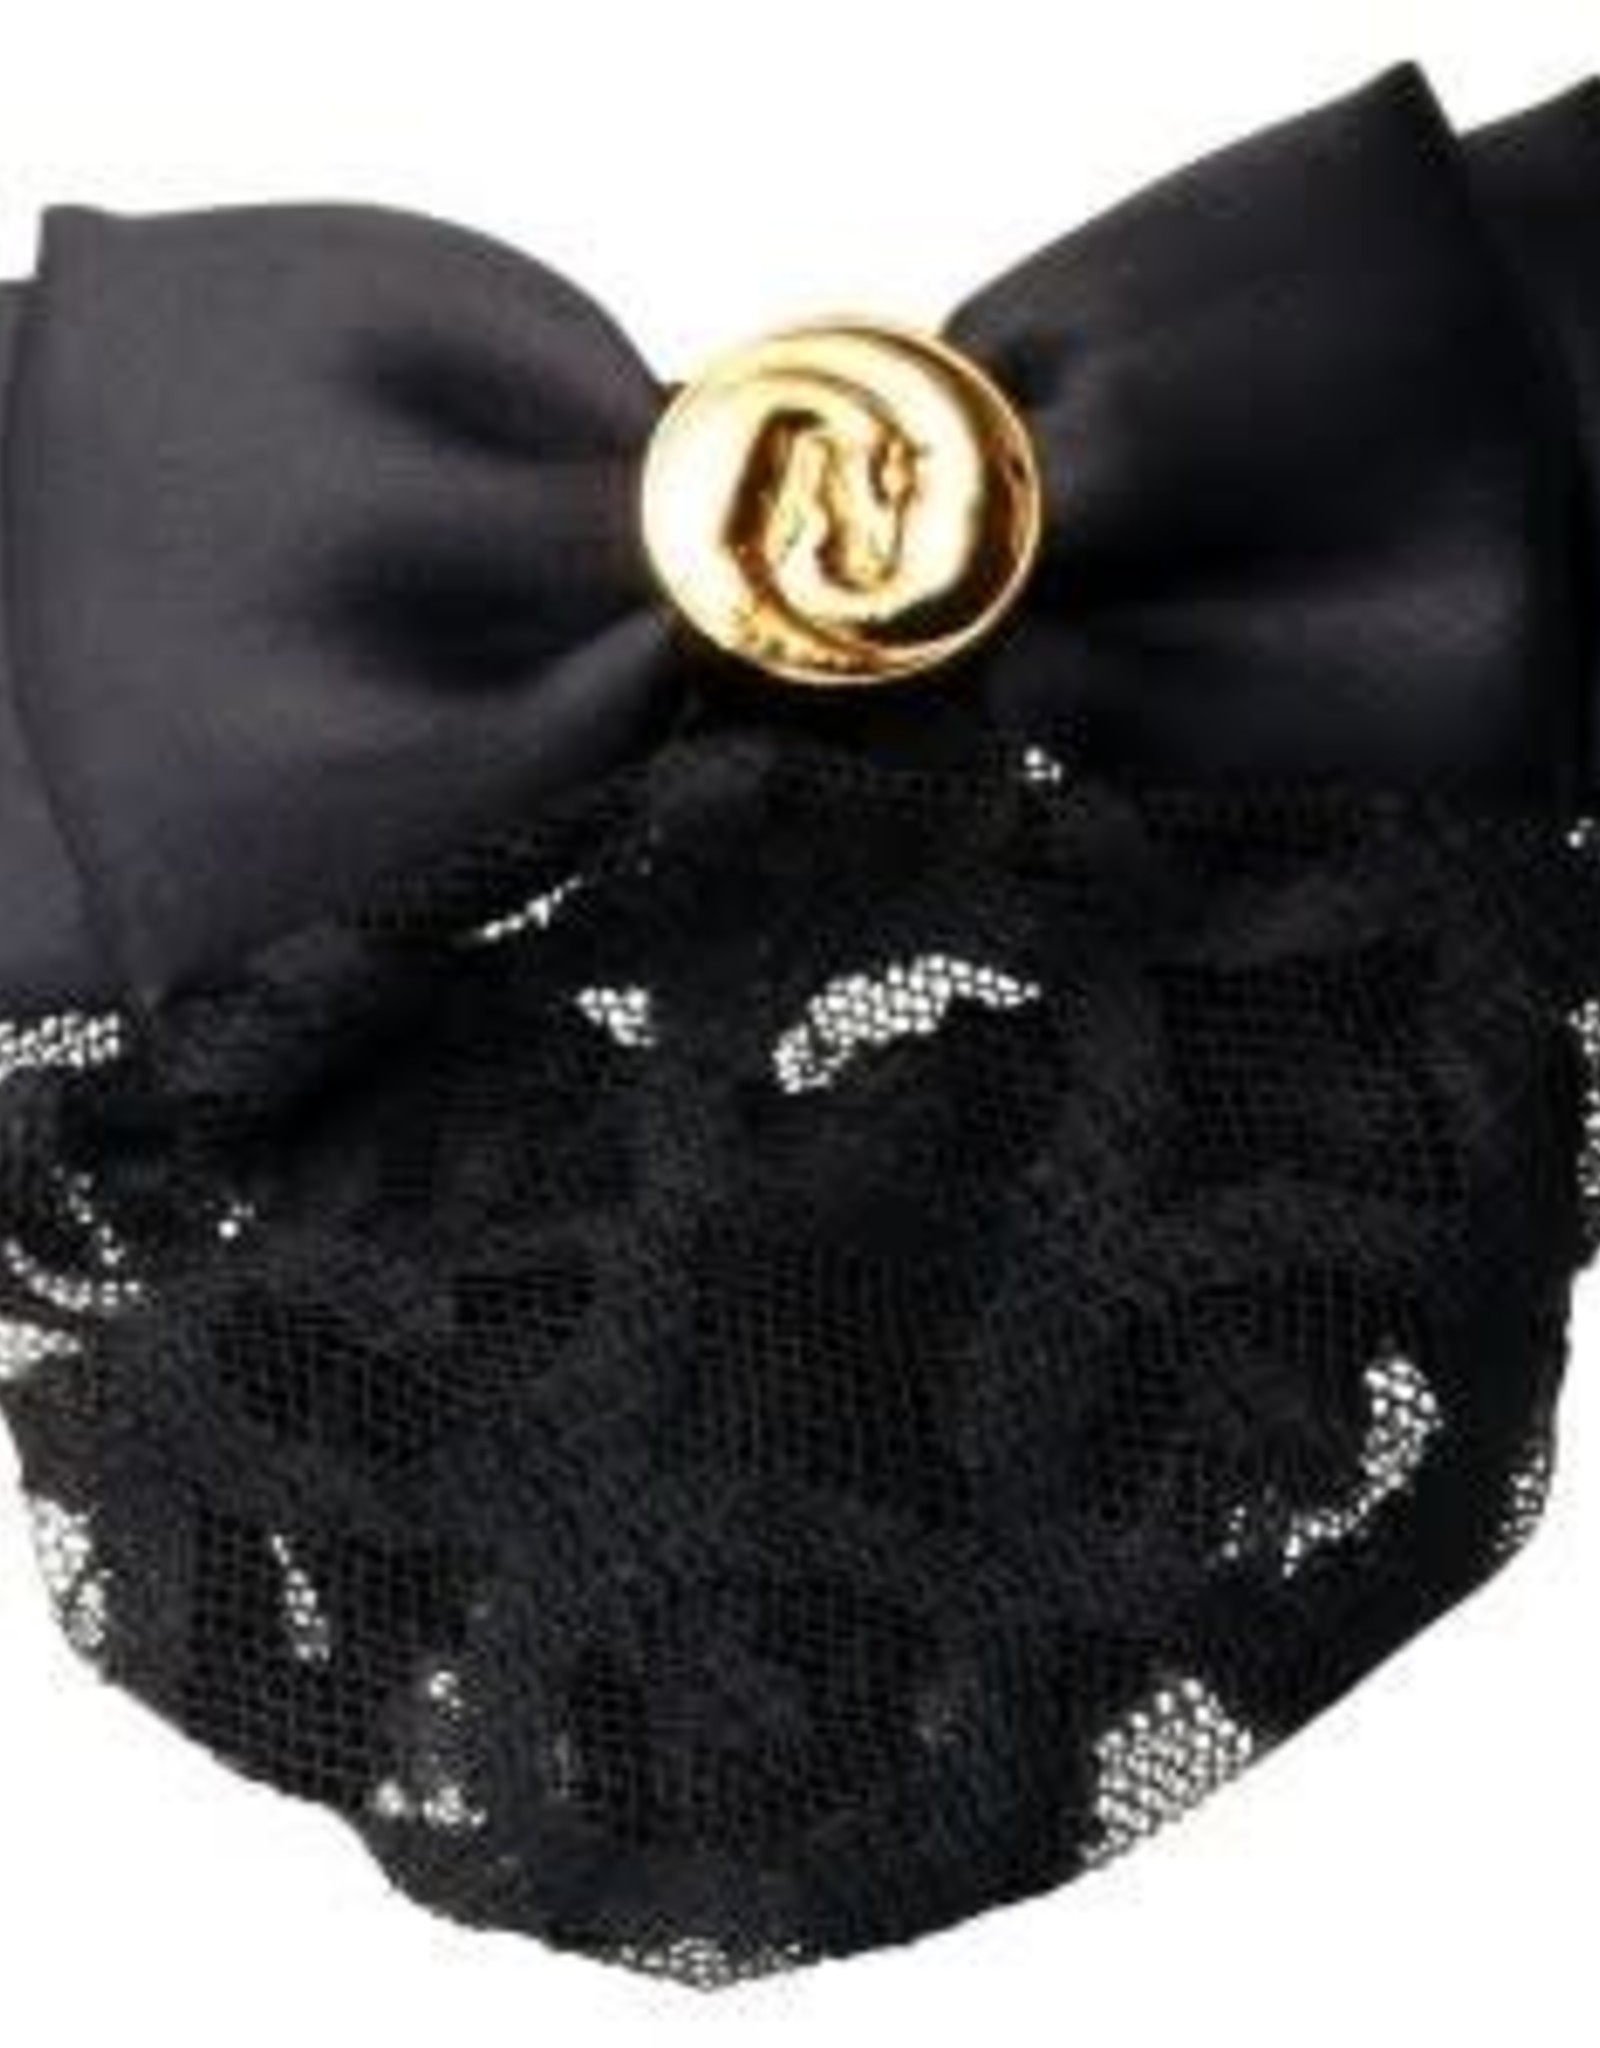 Hawthorne Show Bow - Black Satin with Gold Horseheads